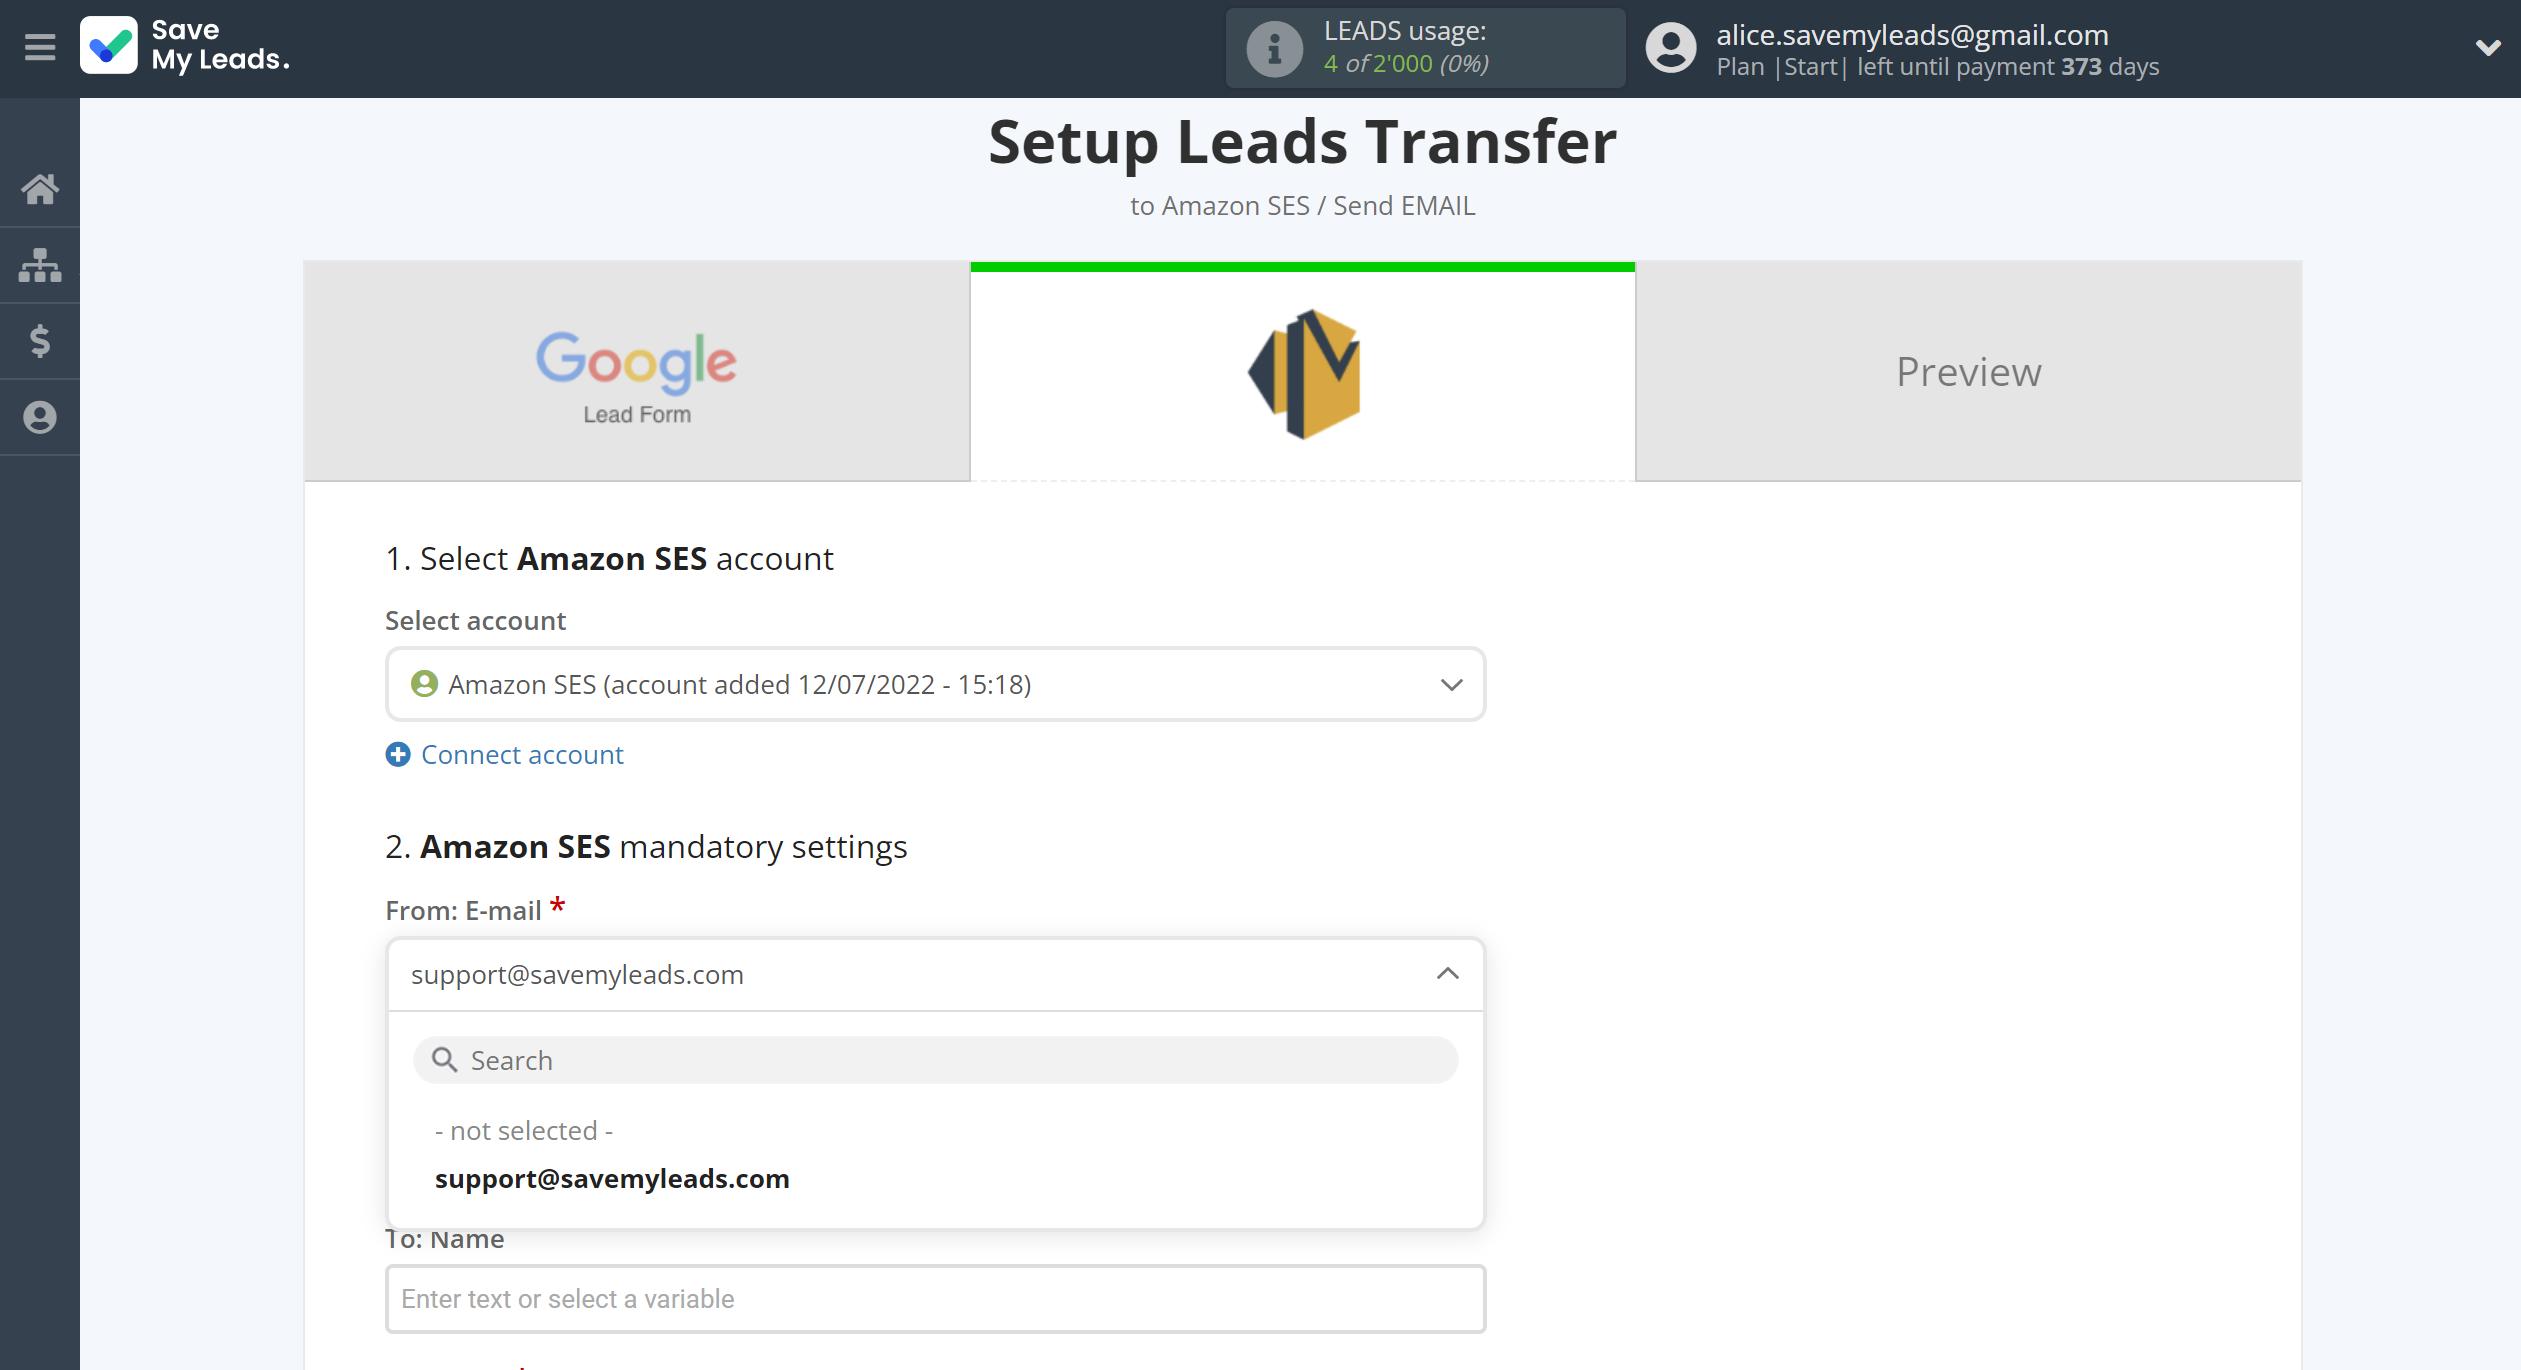 How to Connect Google Lead Form with Amazon SES | Assigning fields